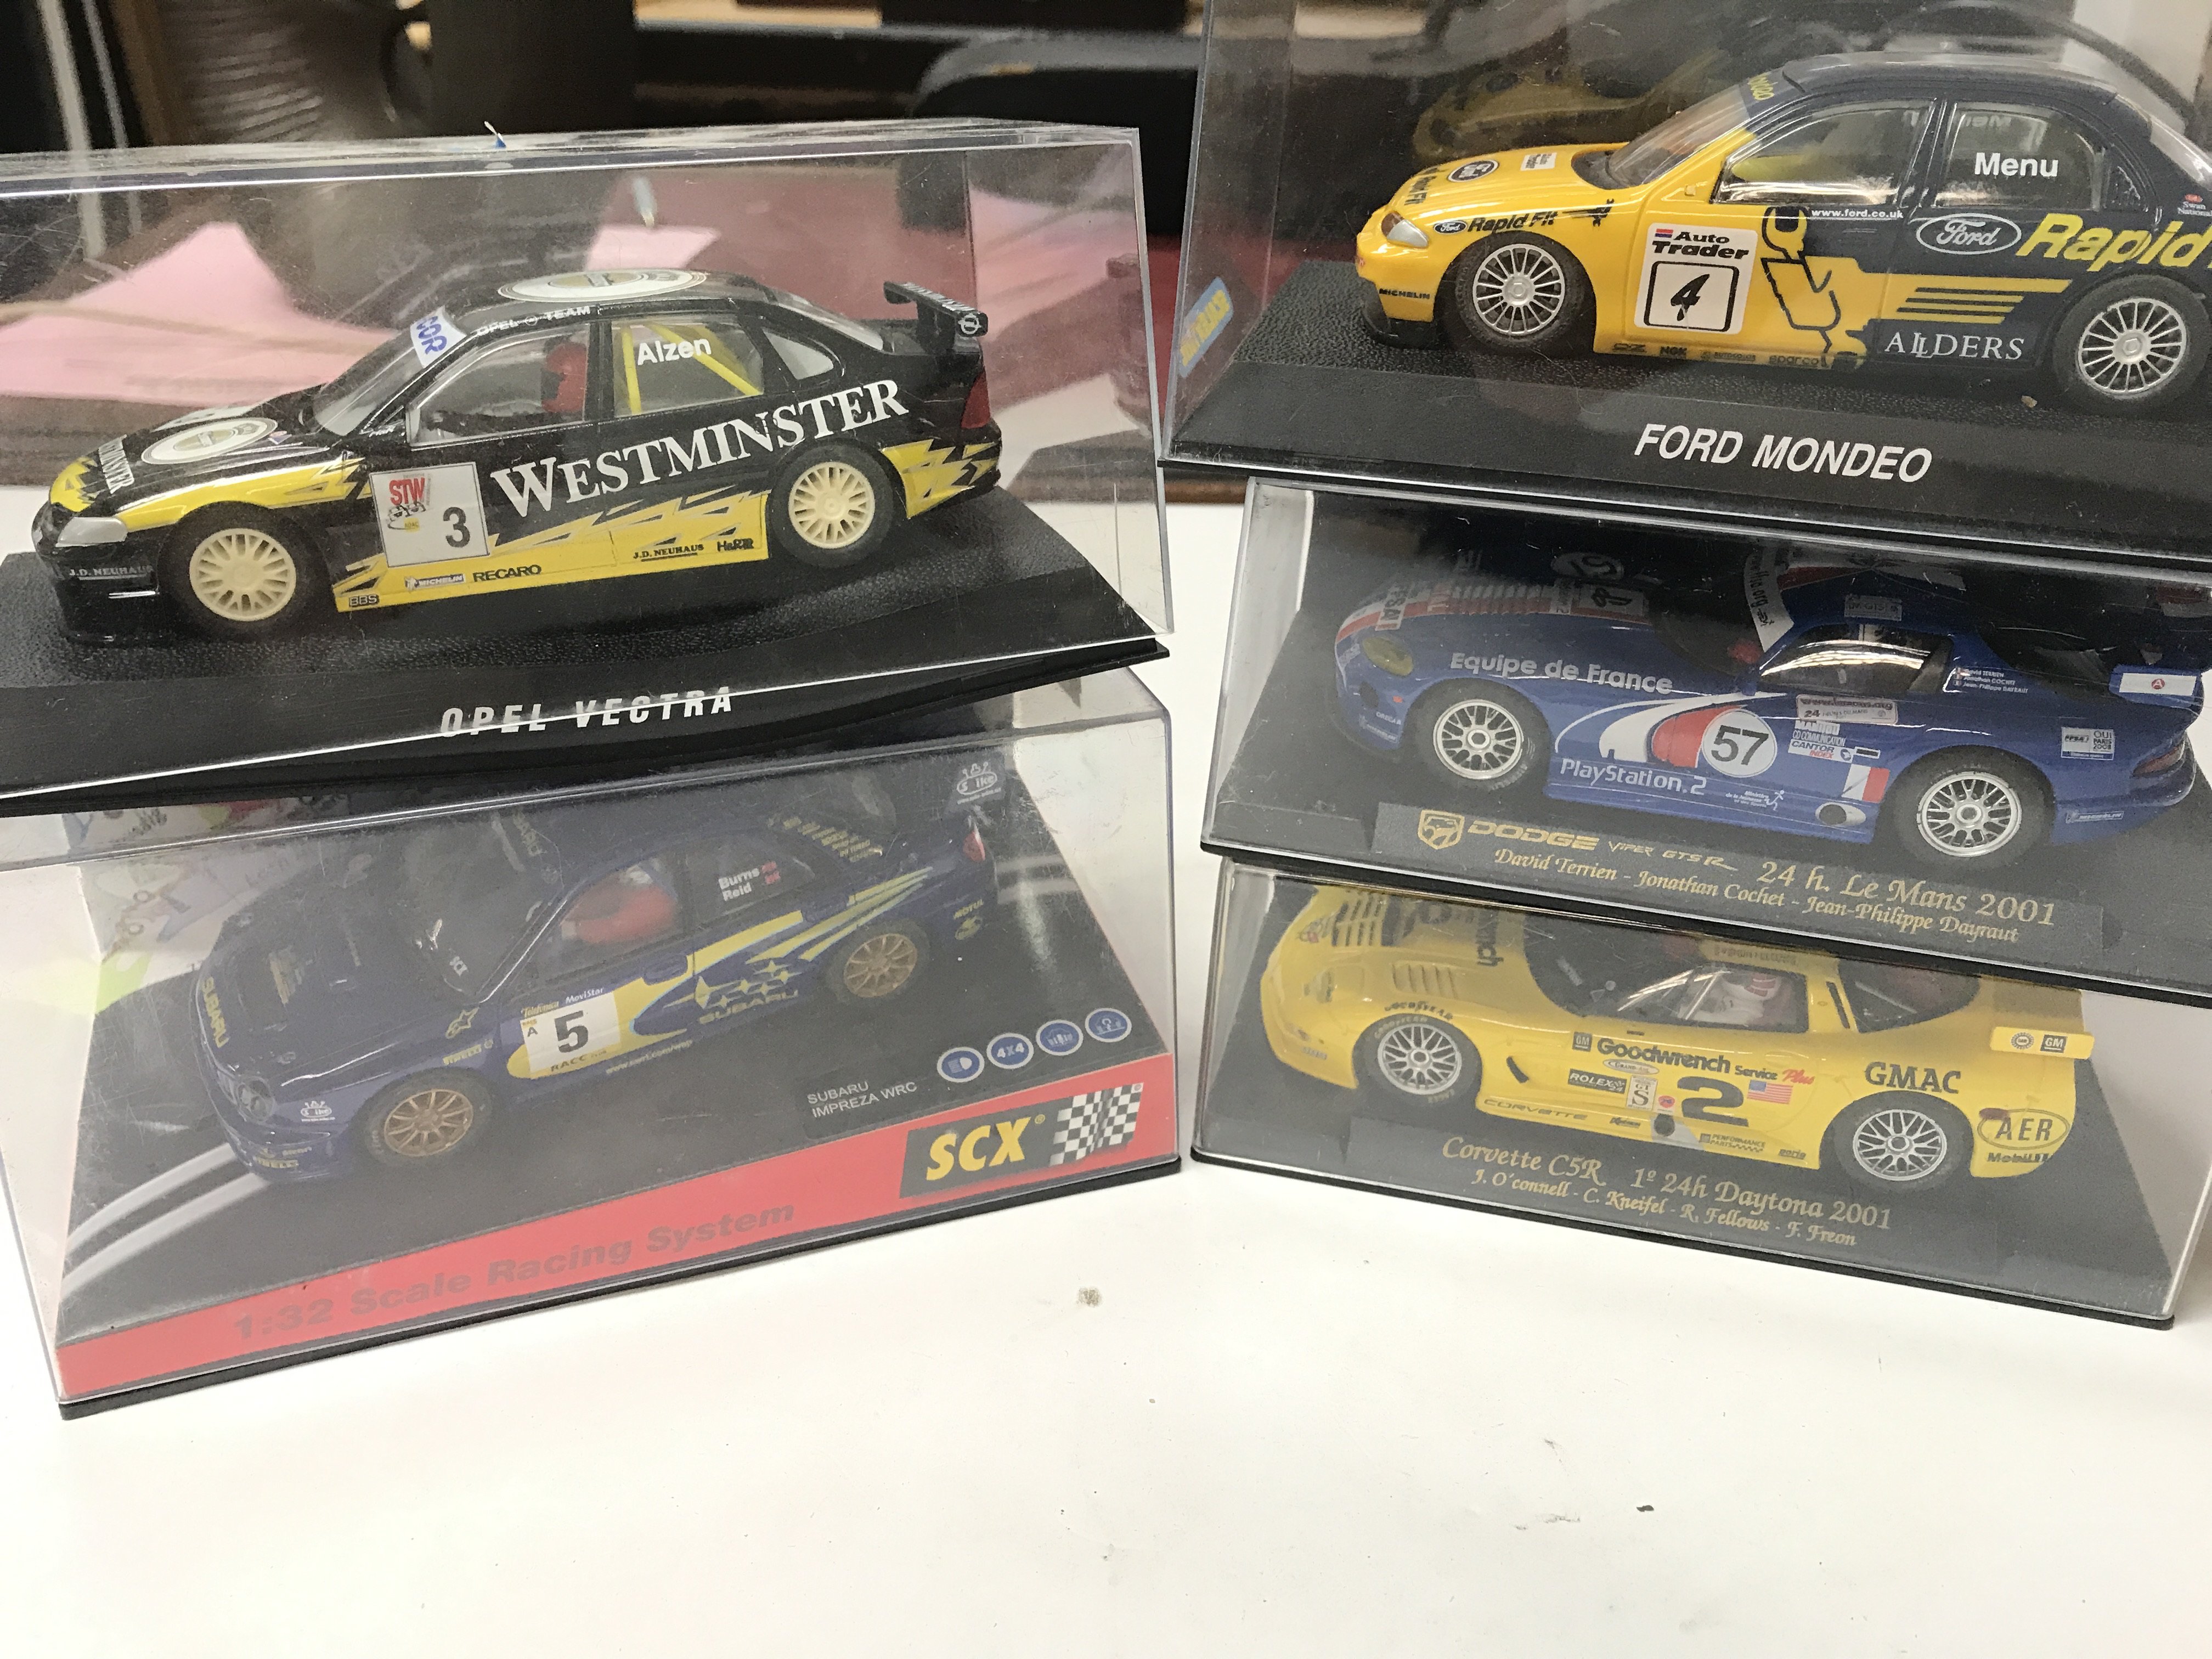 5 X Boxed Slot Racing Cars including 2 x Fly Car Models. SCX And Scalextric Opel Vectra and Ford